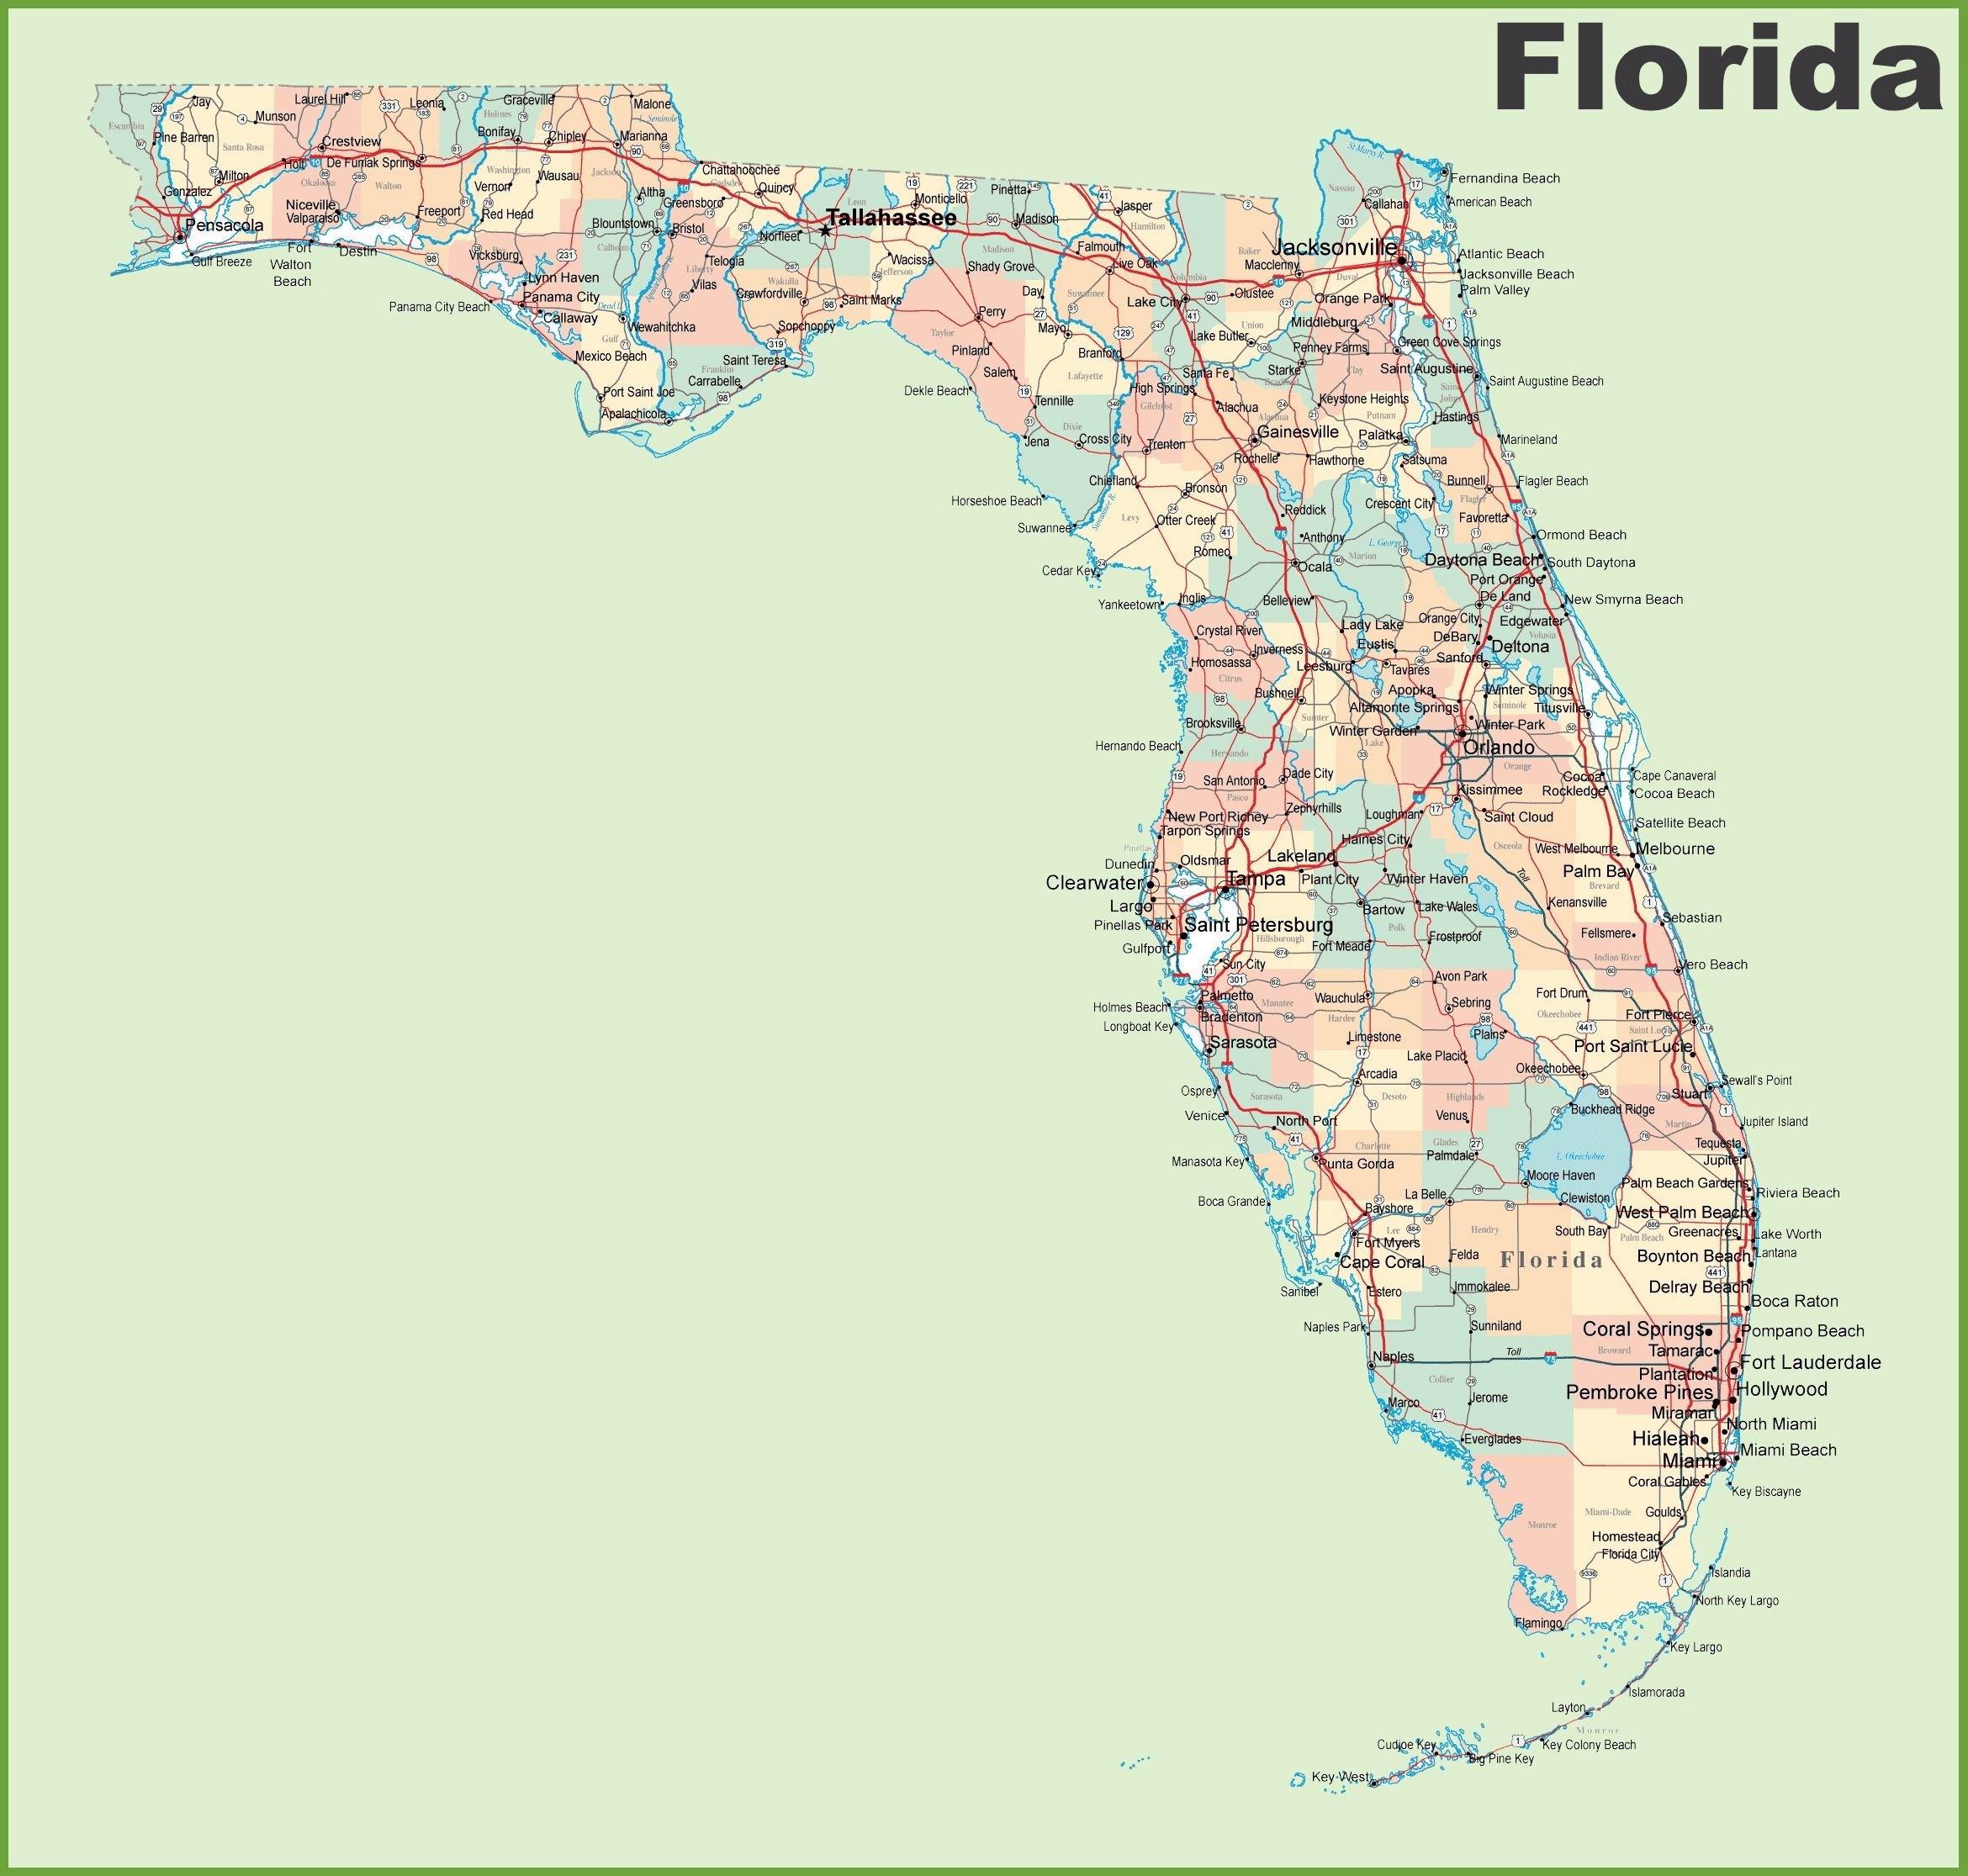 Large Florida Maps For Free Download And Print | High-Resolution And - Florida Scenic Trail Interactive Map